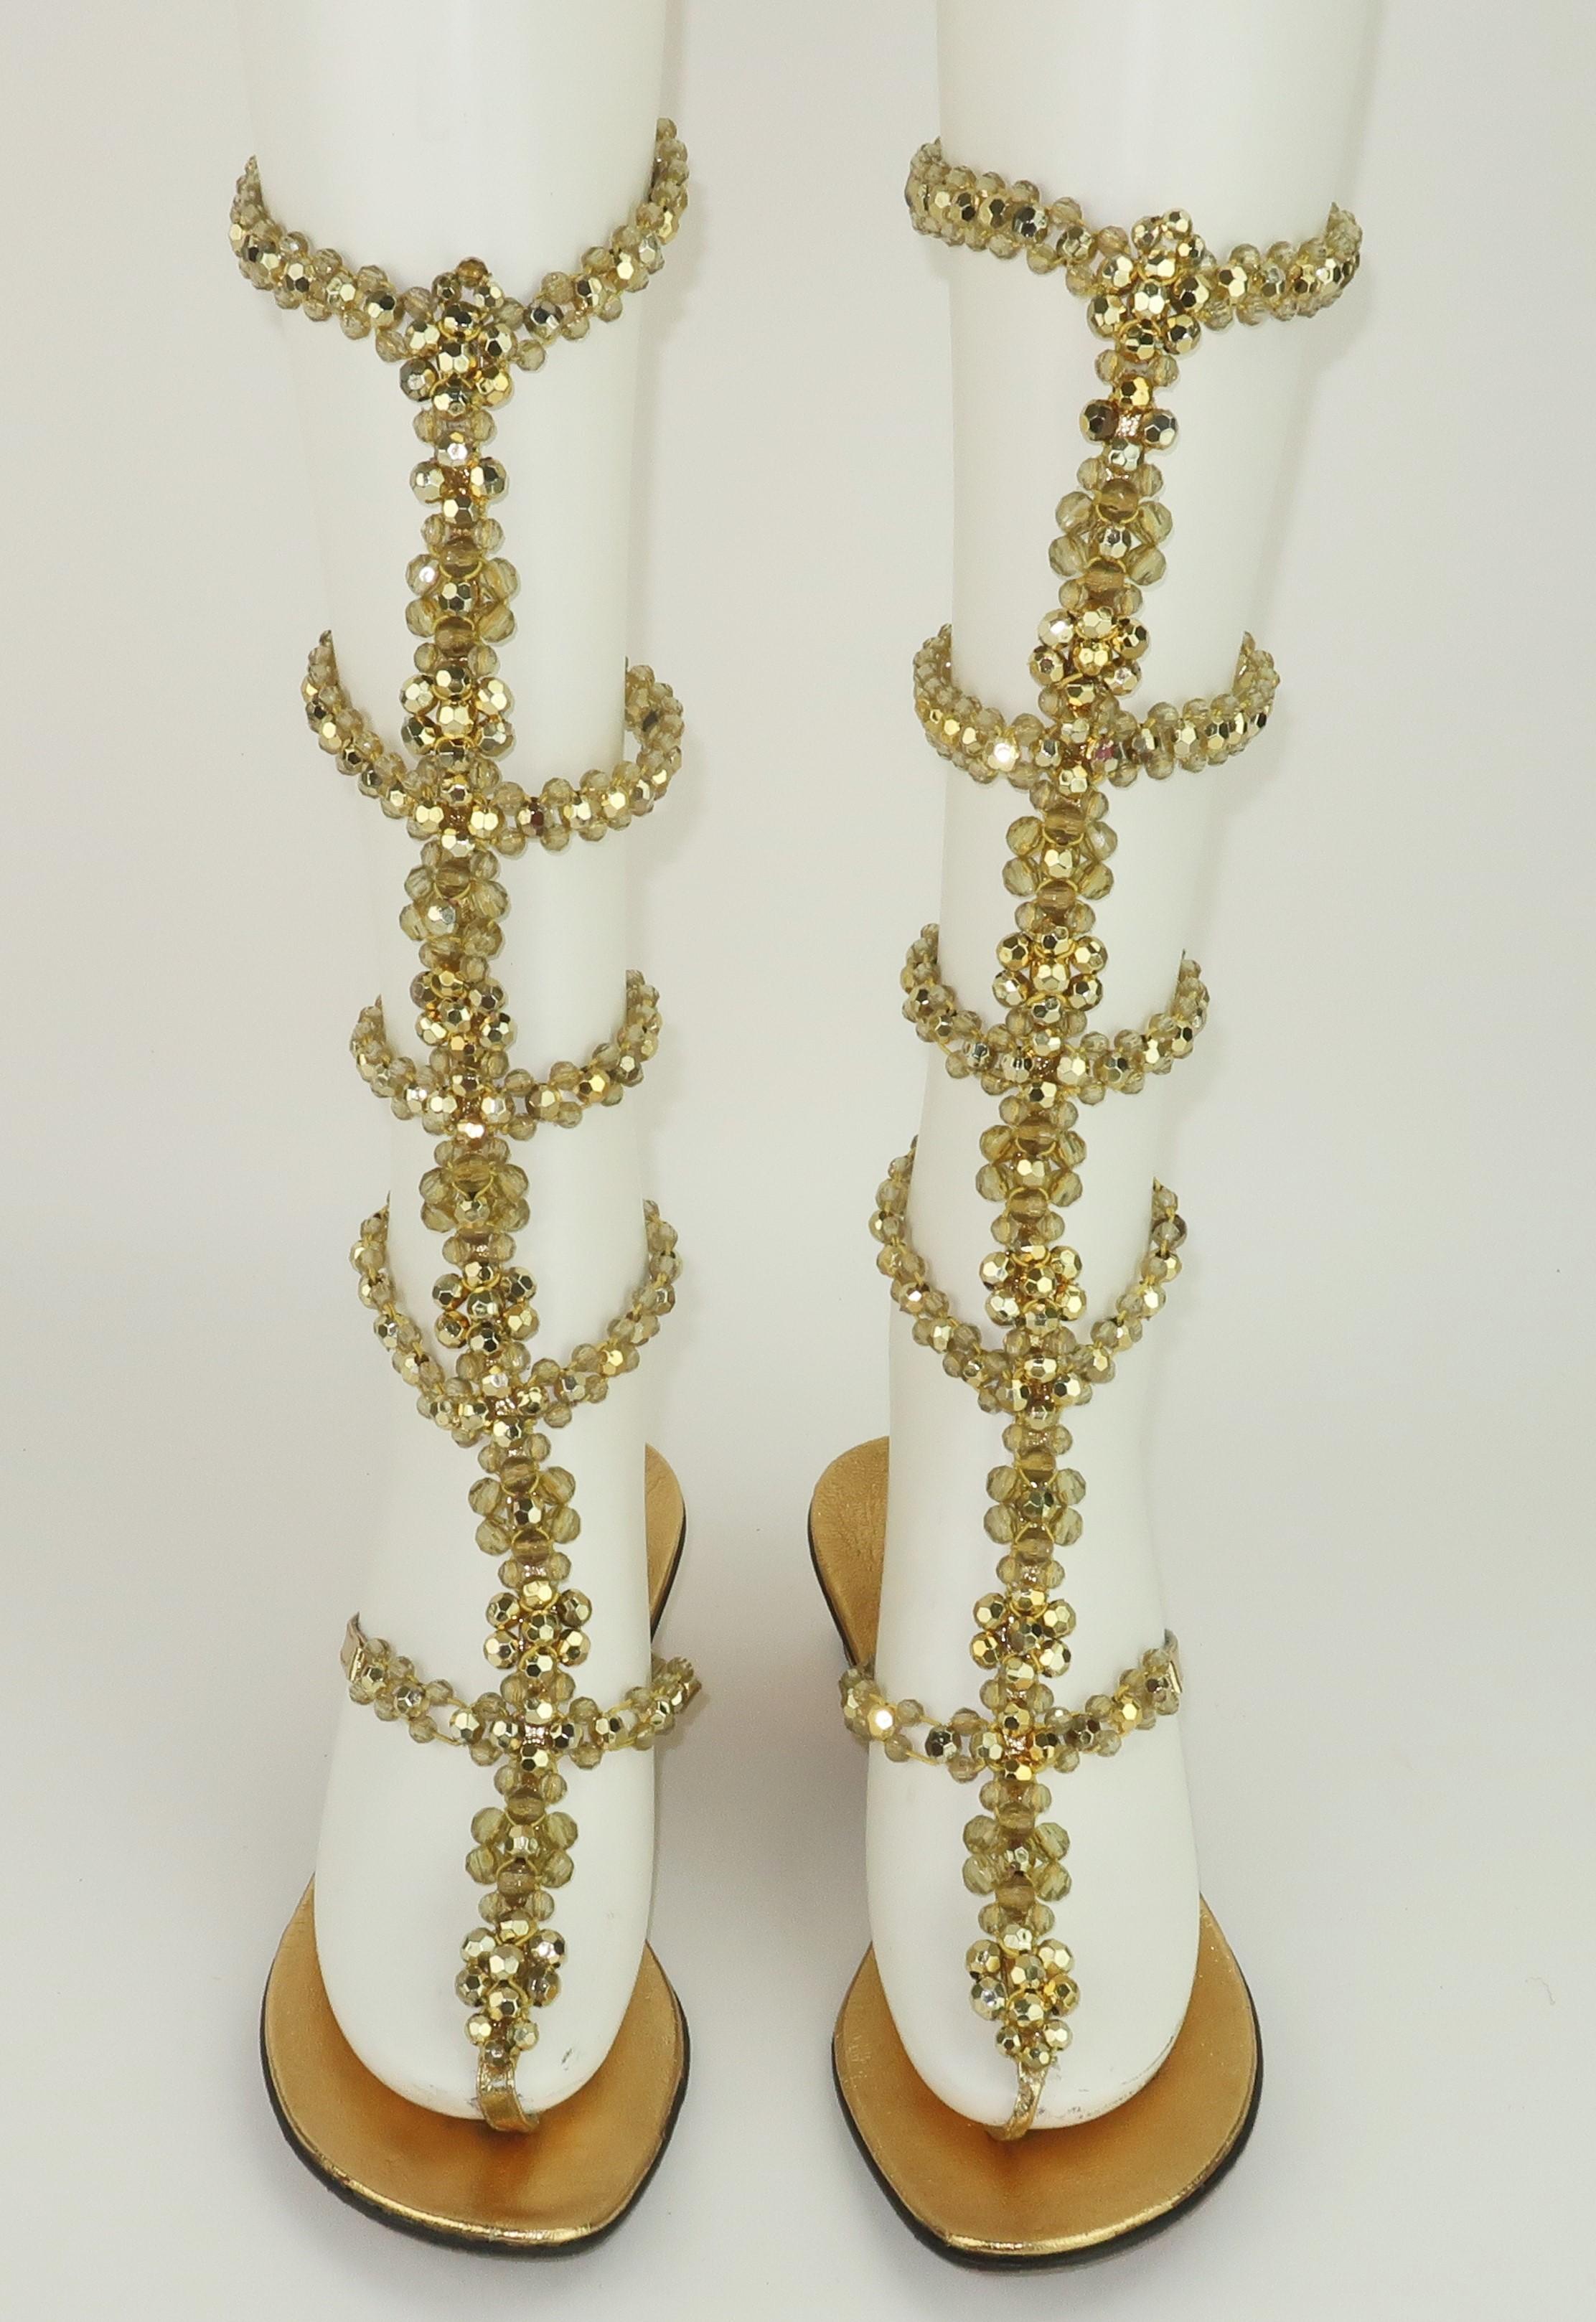 Golden glamour with a gladiator style! 1960's DeMura Italian sandals with leather soles and a man made upper of gold vinyl and elasticized faceted gold beads.  The sandals have a thong construction and 5 rows of beads with a comfortable 1.75